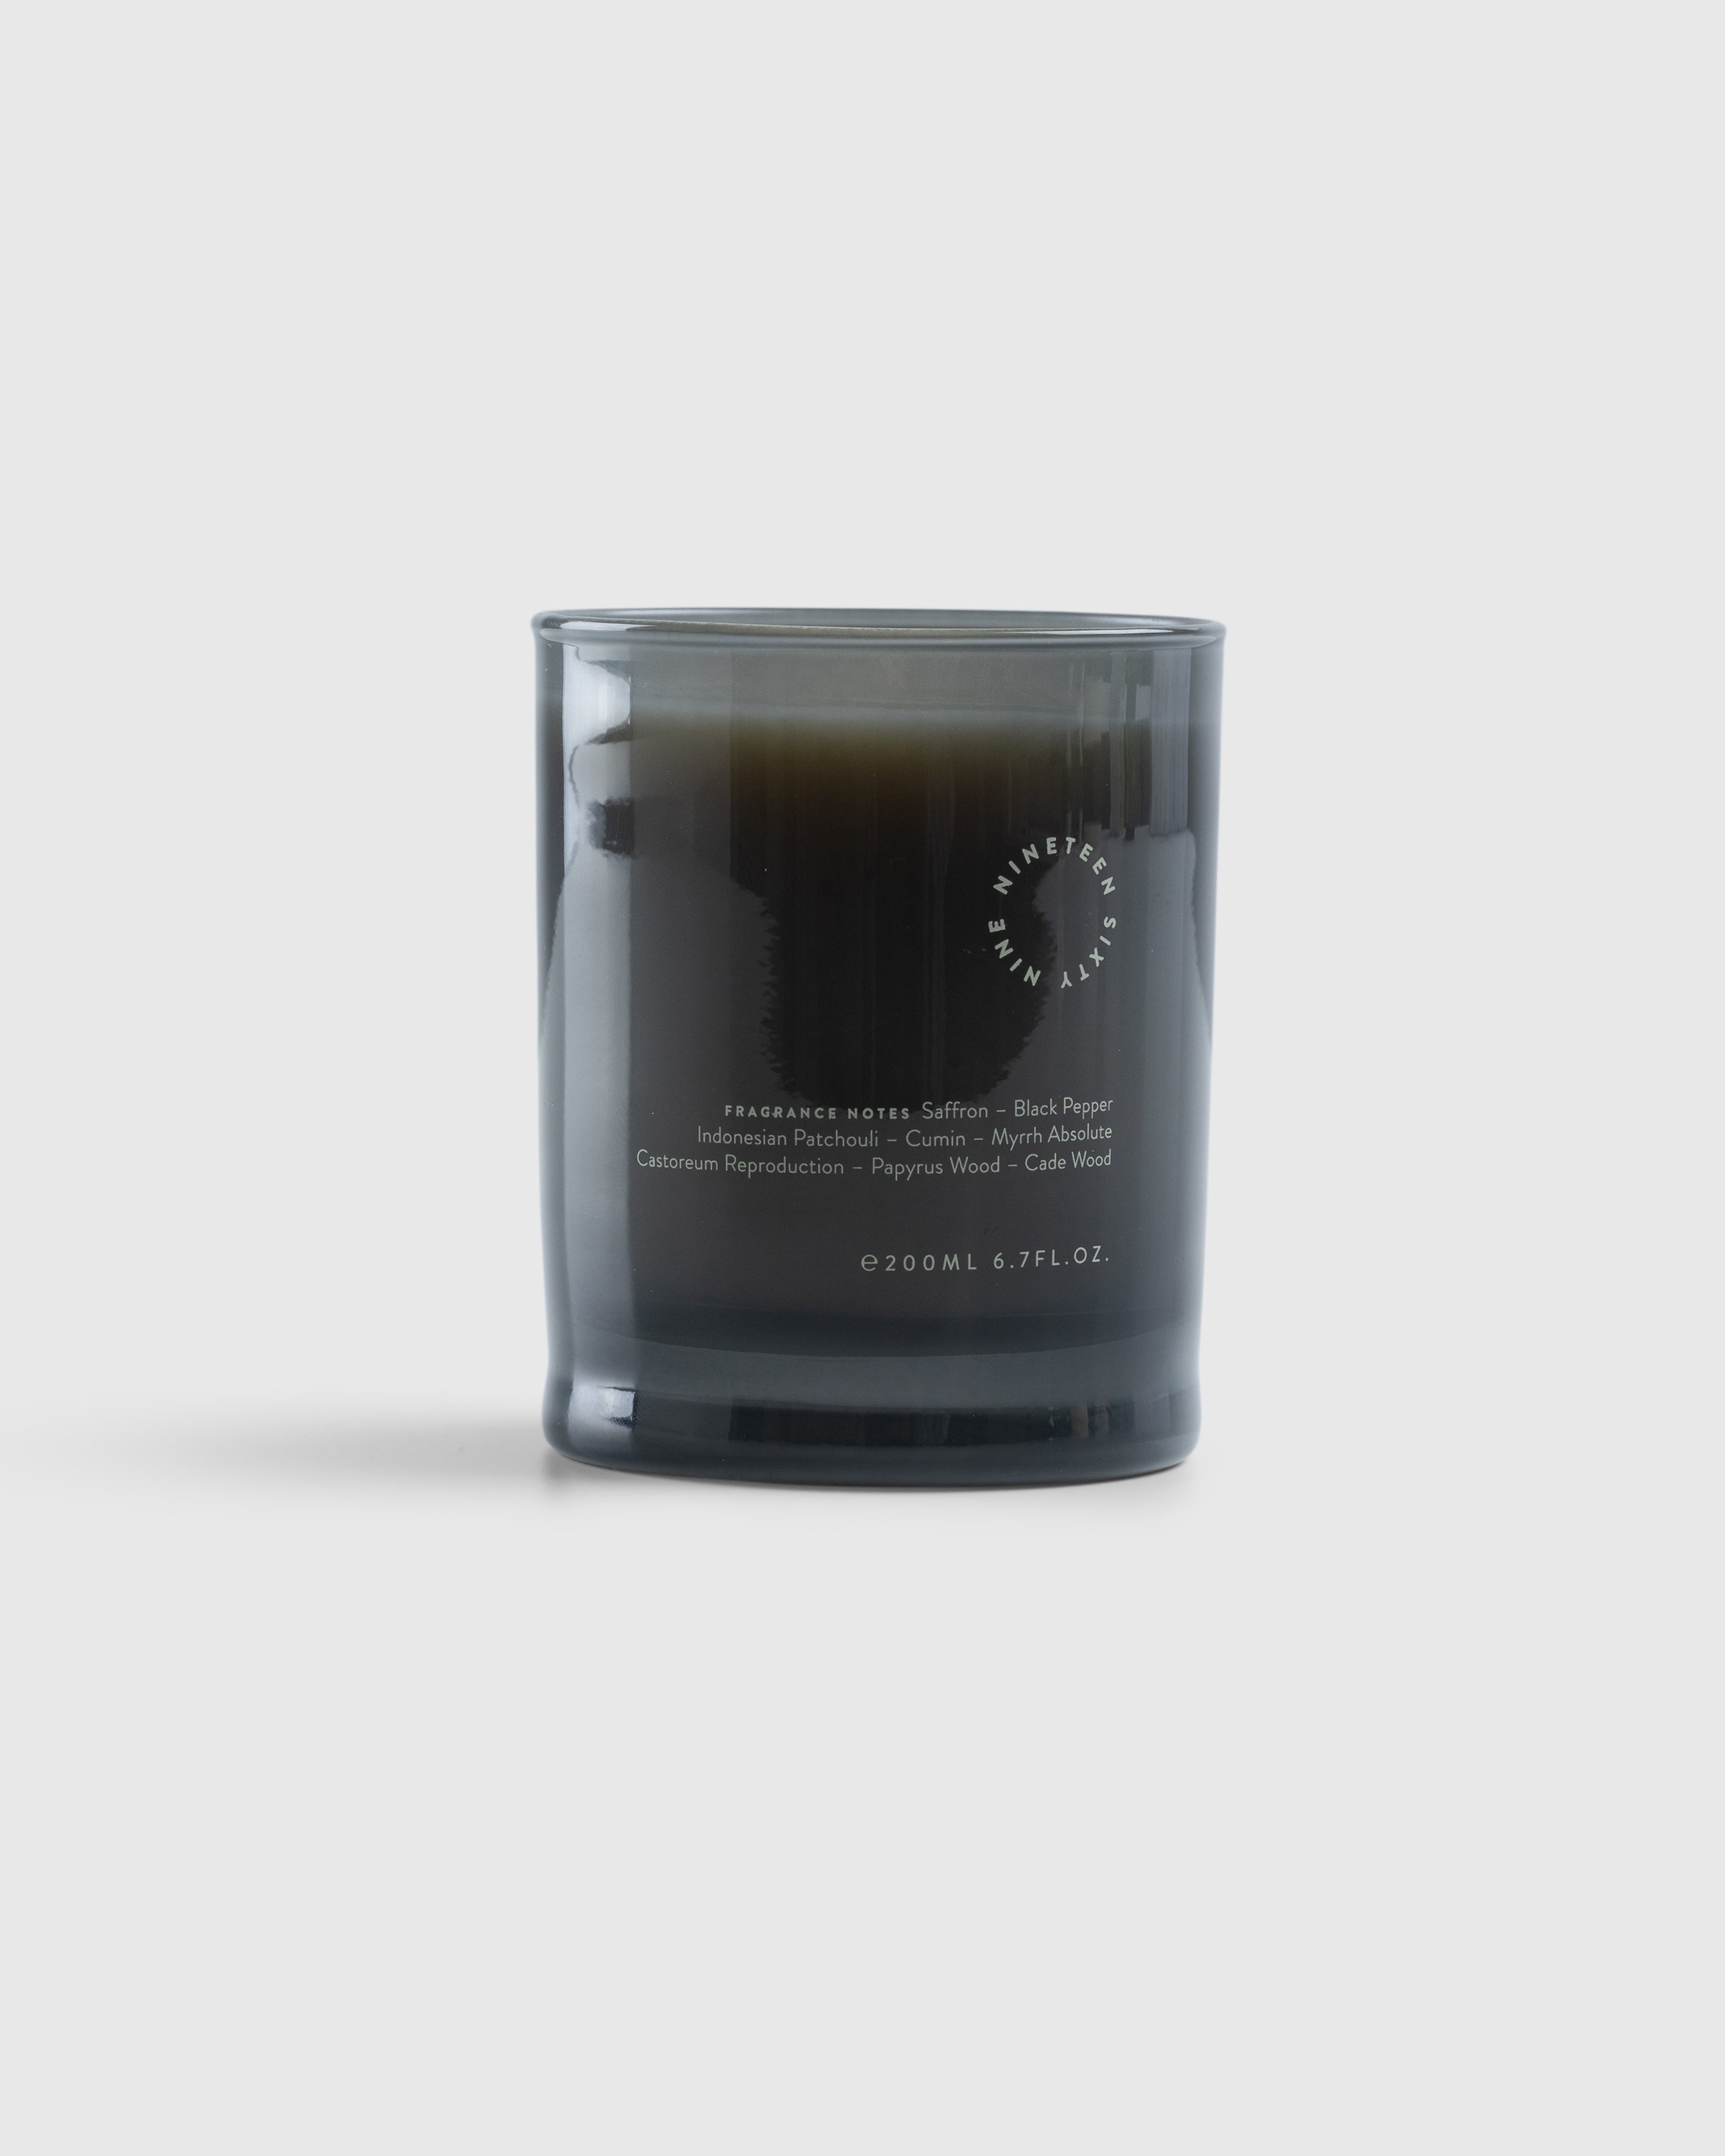 19-69 - Christopher BP Candle - Lifestyle - Grey - Image 2